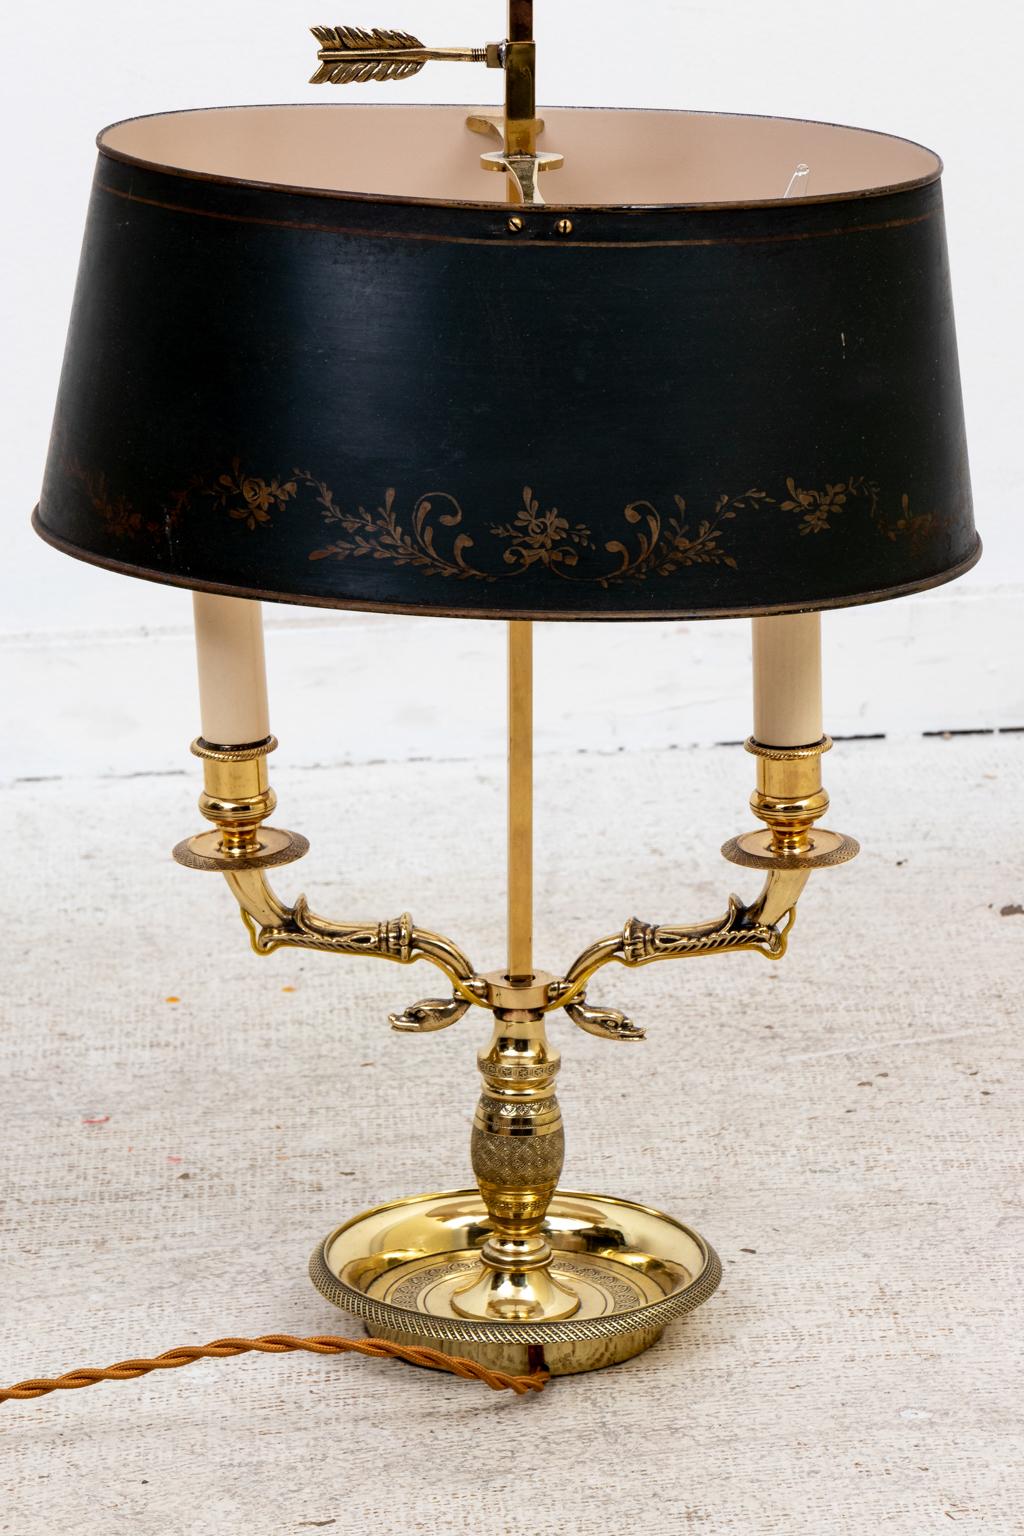 Circa 1890s antique English Regency style brass and green tole bouillotte lamp, newly shined and lacquered. Shades not included. Made in England. Please note of wear consistent with age.